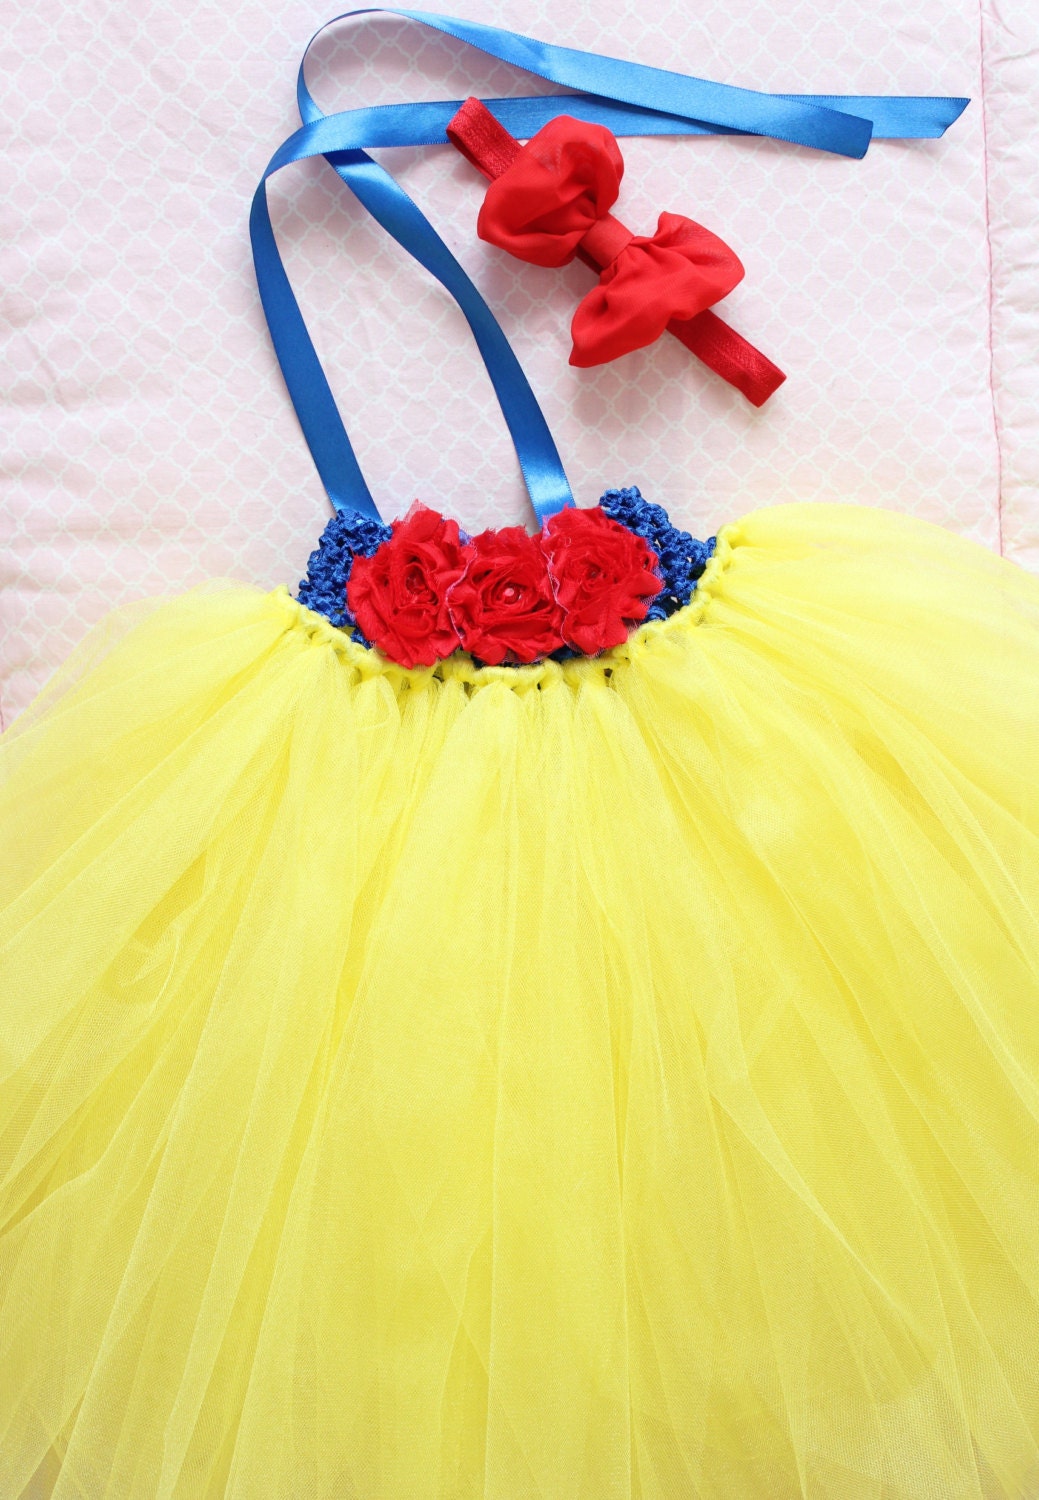 Beautiful Snow White Tutu Dress Costume With Red Hair Bow for - Etsy